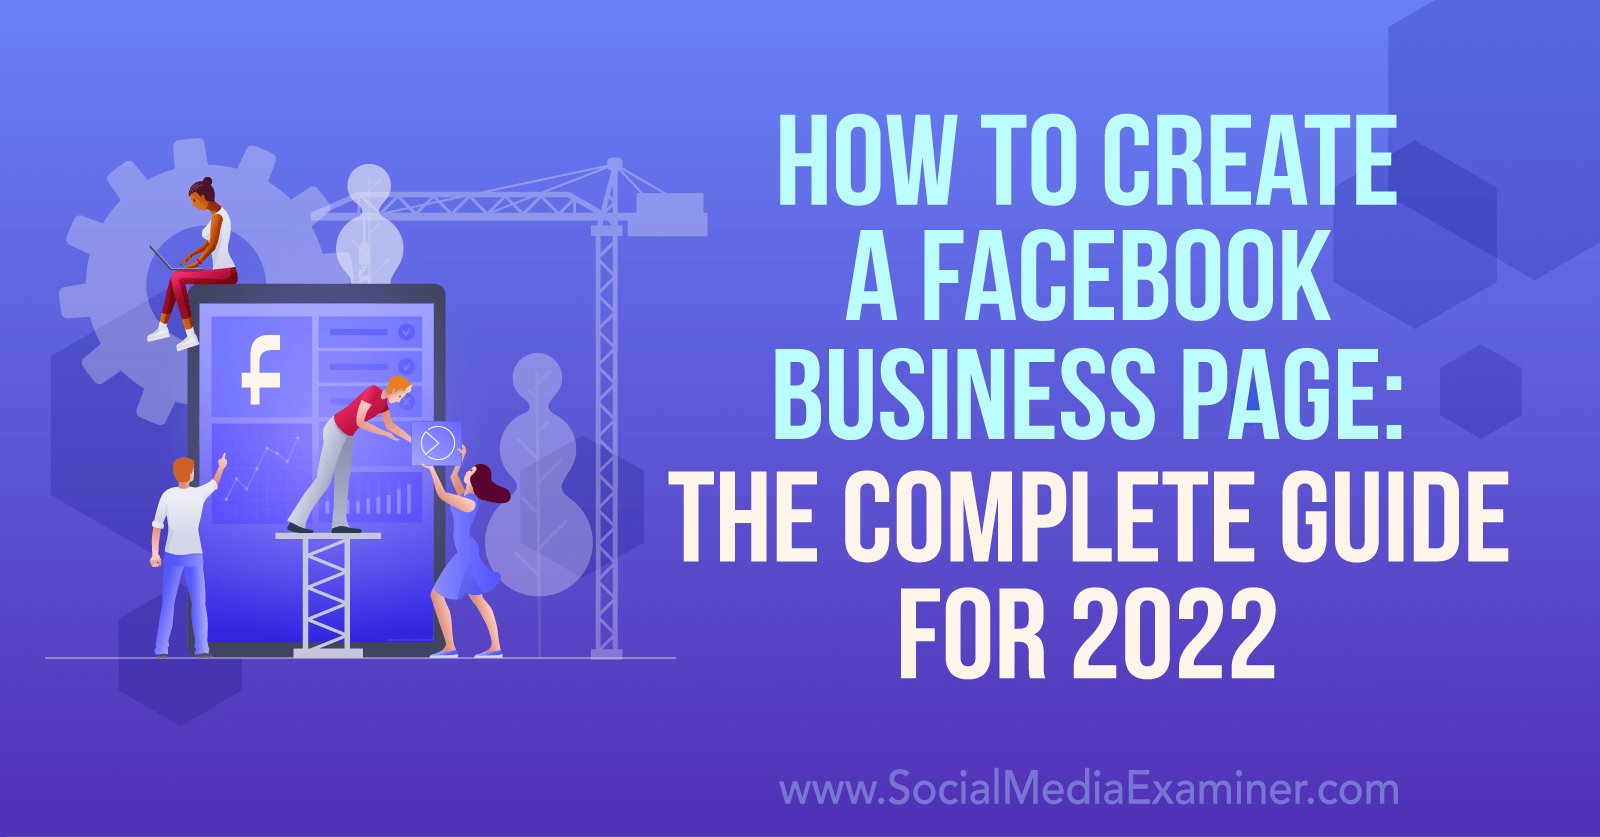 How to Create a Facebook Business Page: The Complete Guide for 2022-Social Media Examiner